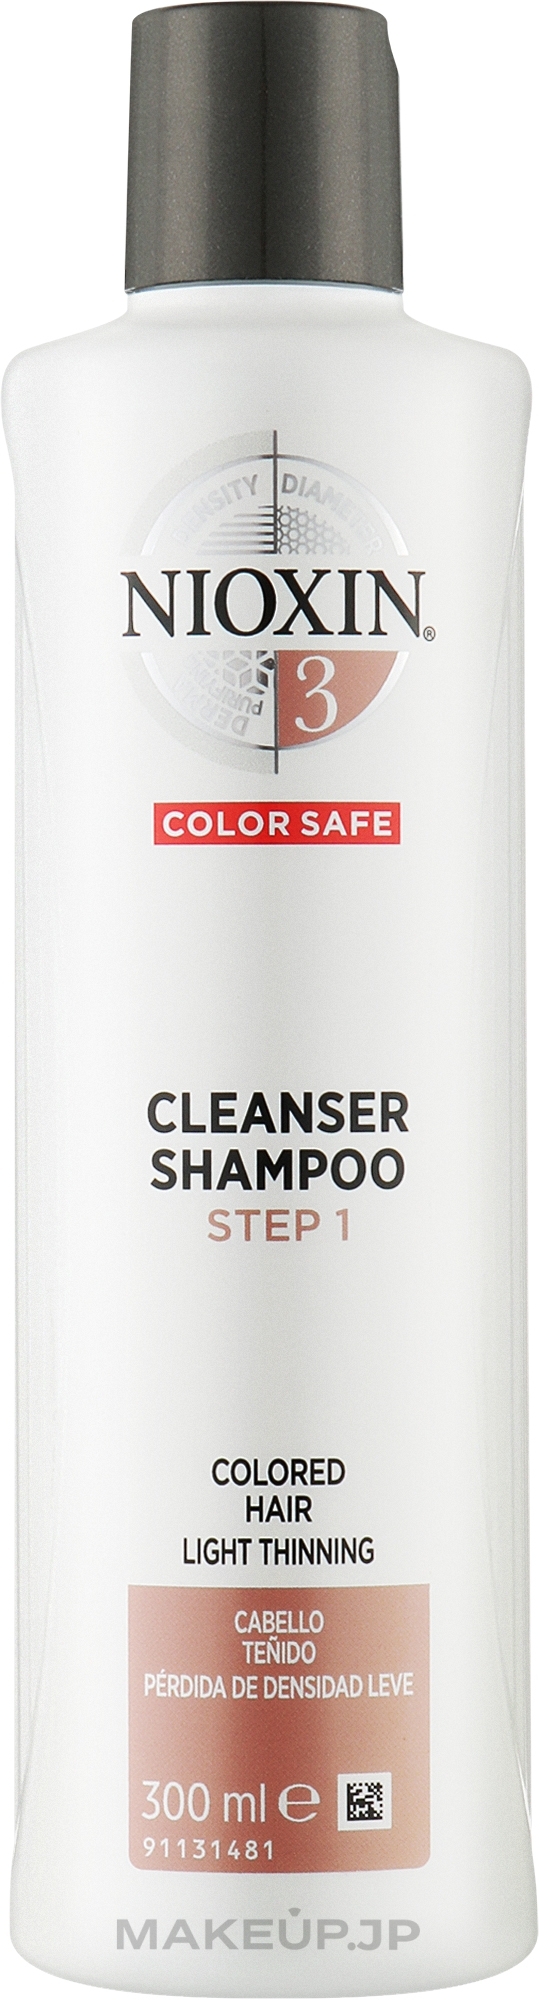 Cleansing Shampoo - Nioxin System 3 Cleanser Shampoo Step 1 Colored Hair Light Thinning — photo 300 ml